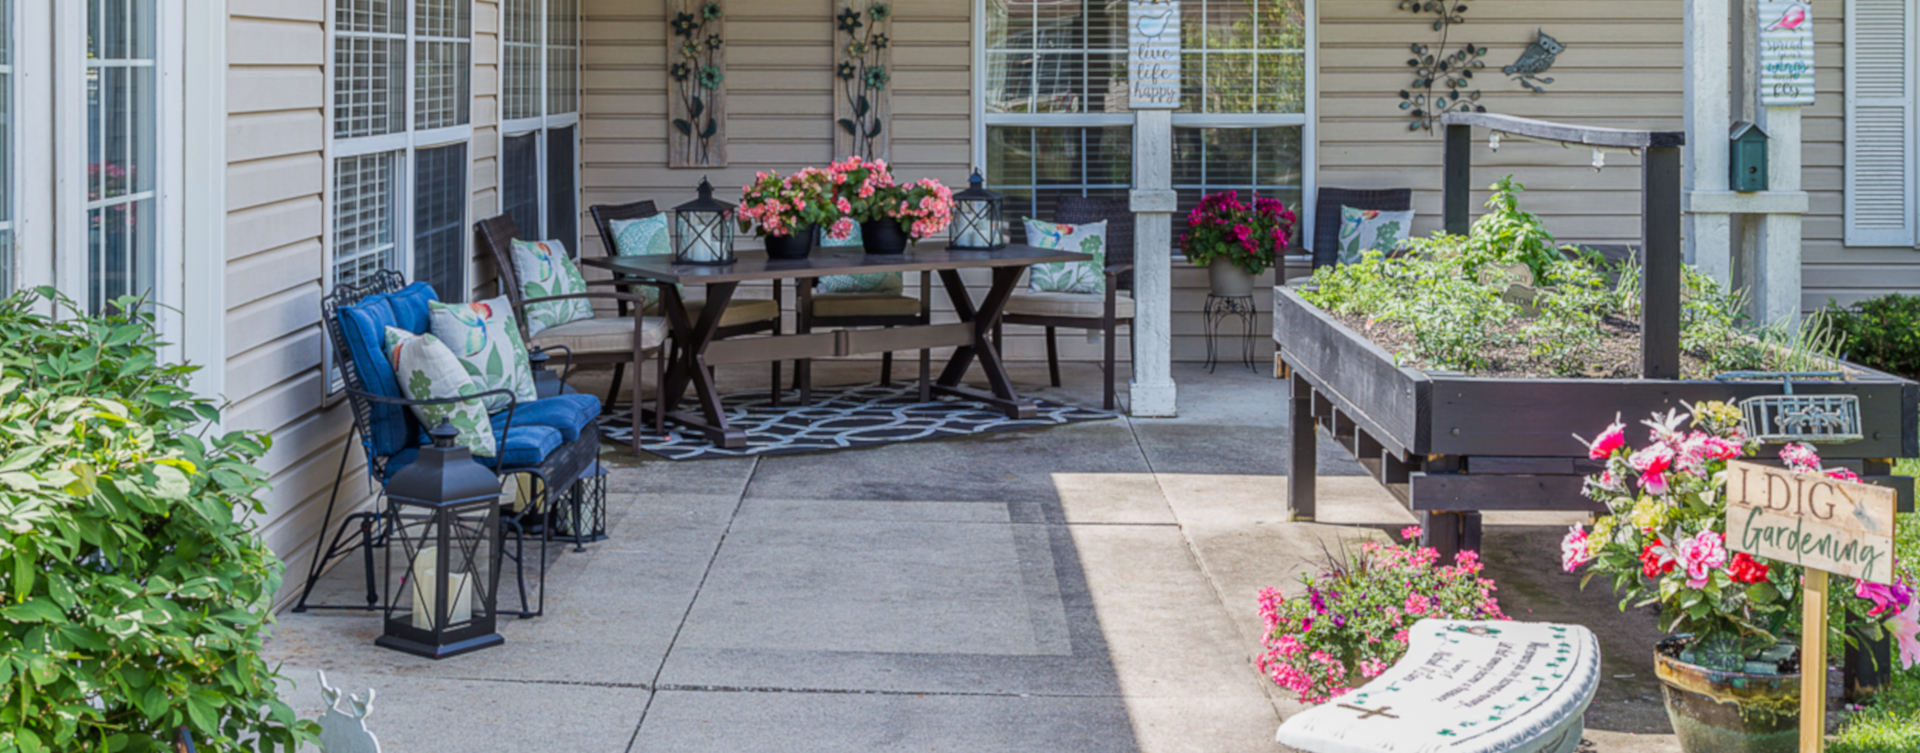 Enjoy the outdoors in a whole new light by stepping into our secure courtyard at Bickford of Urbandale